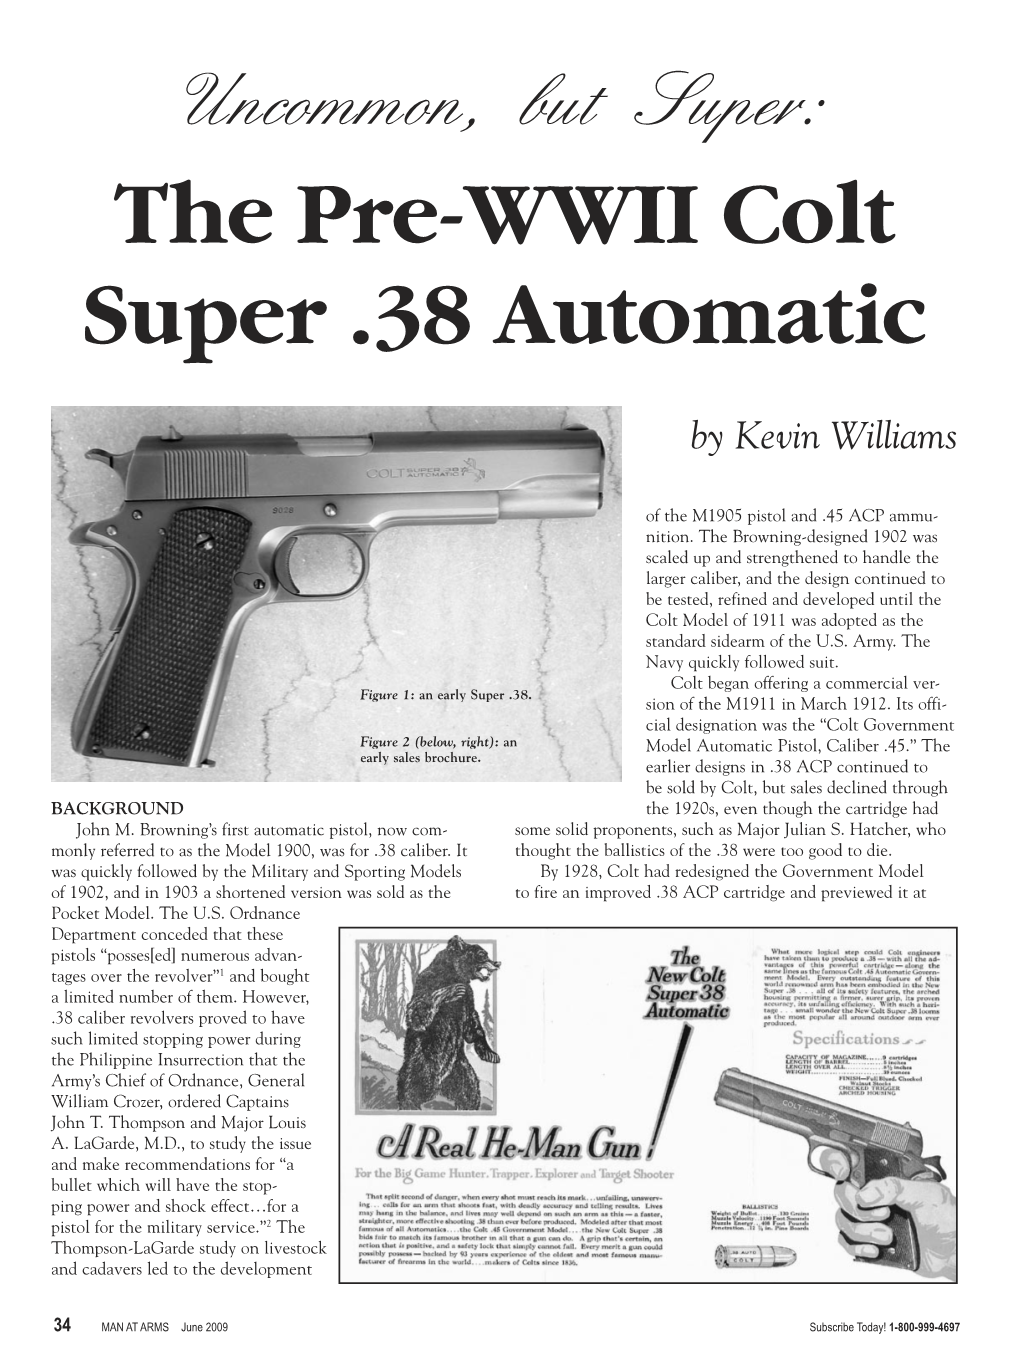 The Pre-WWII Colt Super .38 Automatic by Kevin Williams